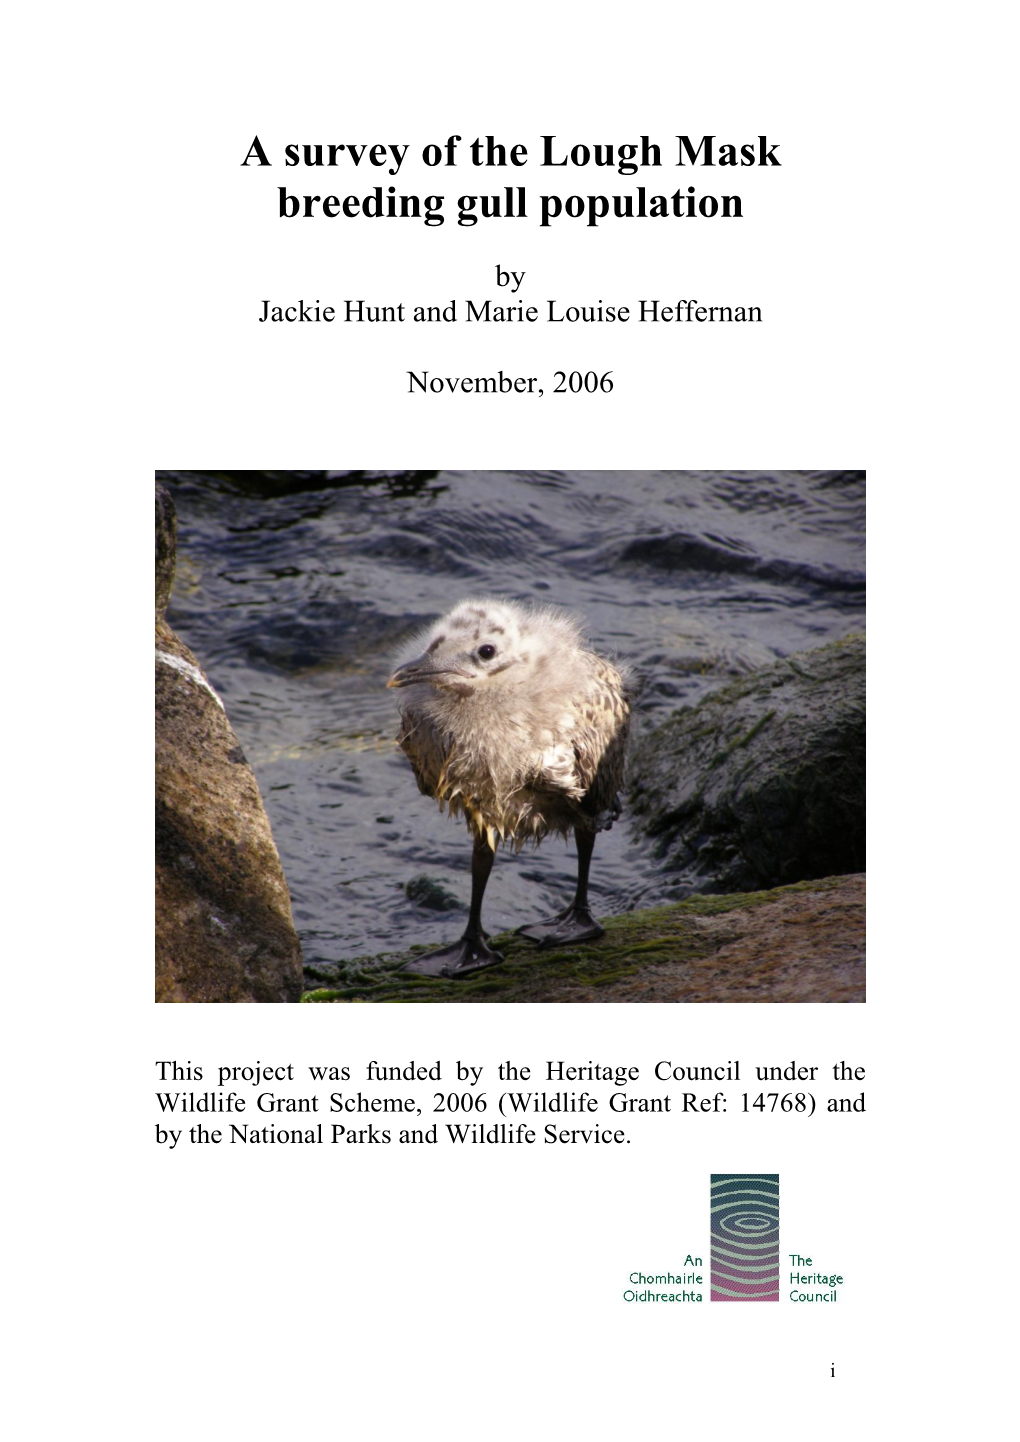 A Survey of the Lough Mask Breeding Gull Population